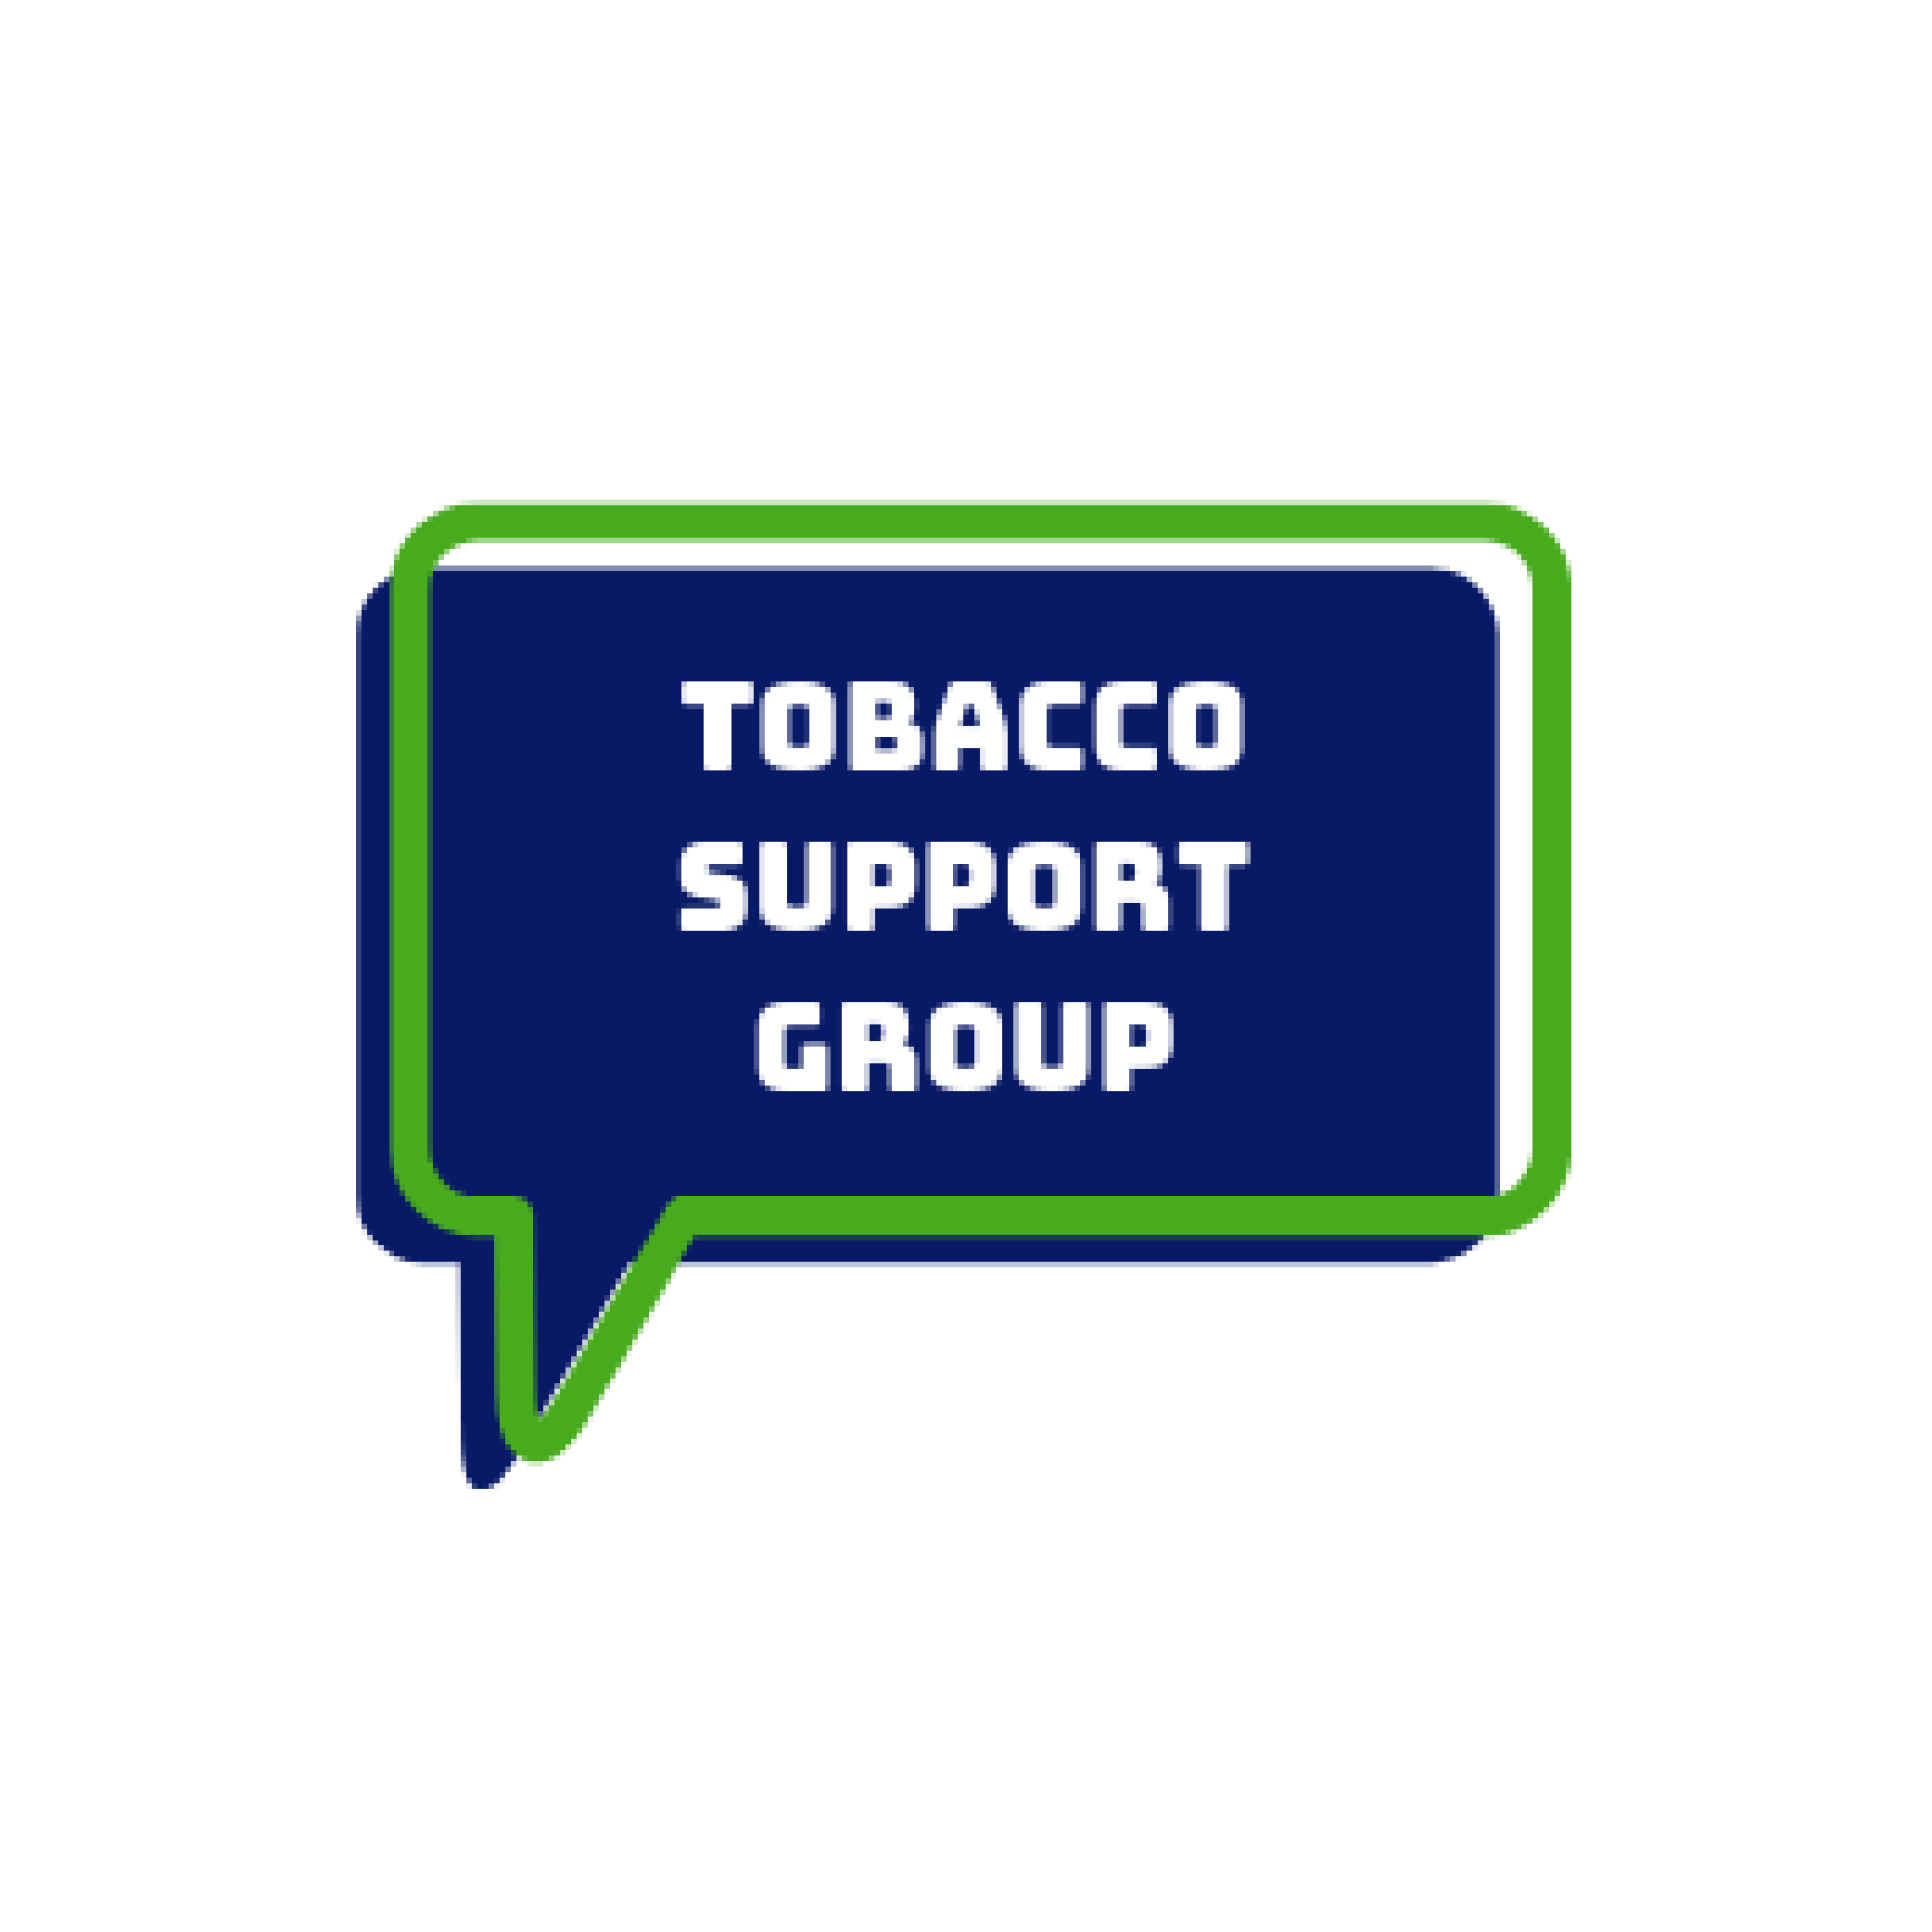 Tobacco Support Group logo